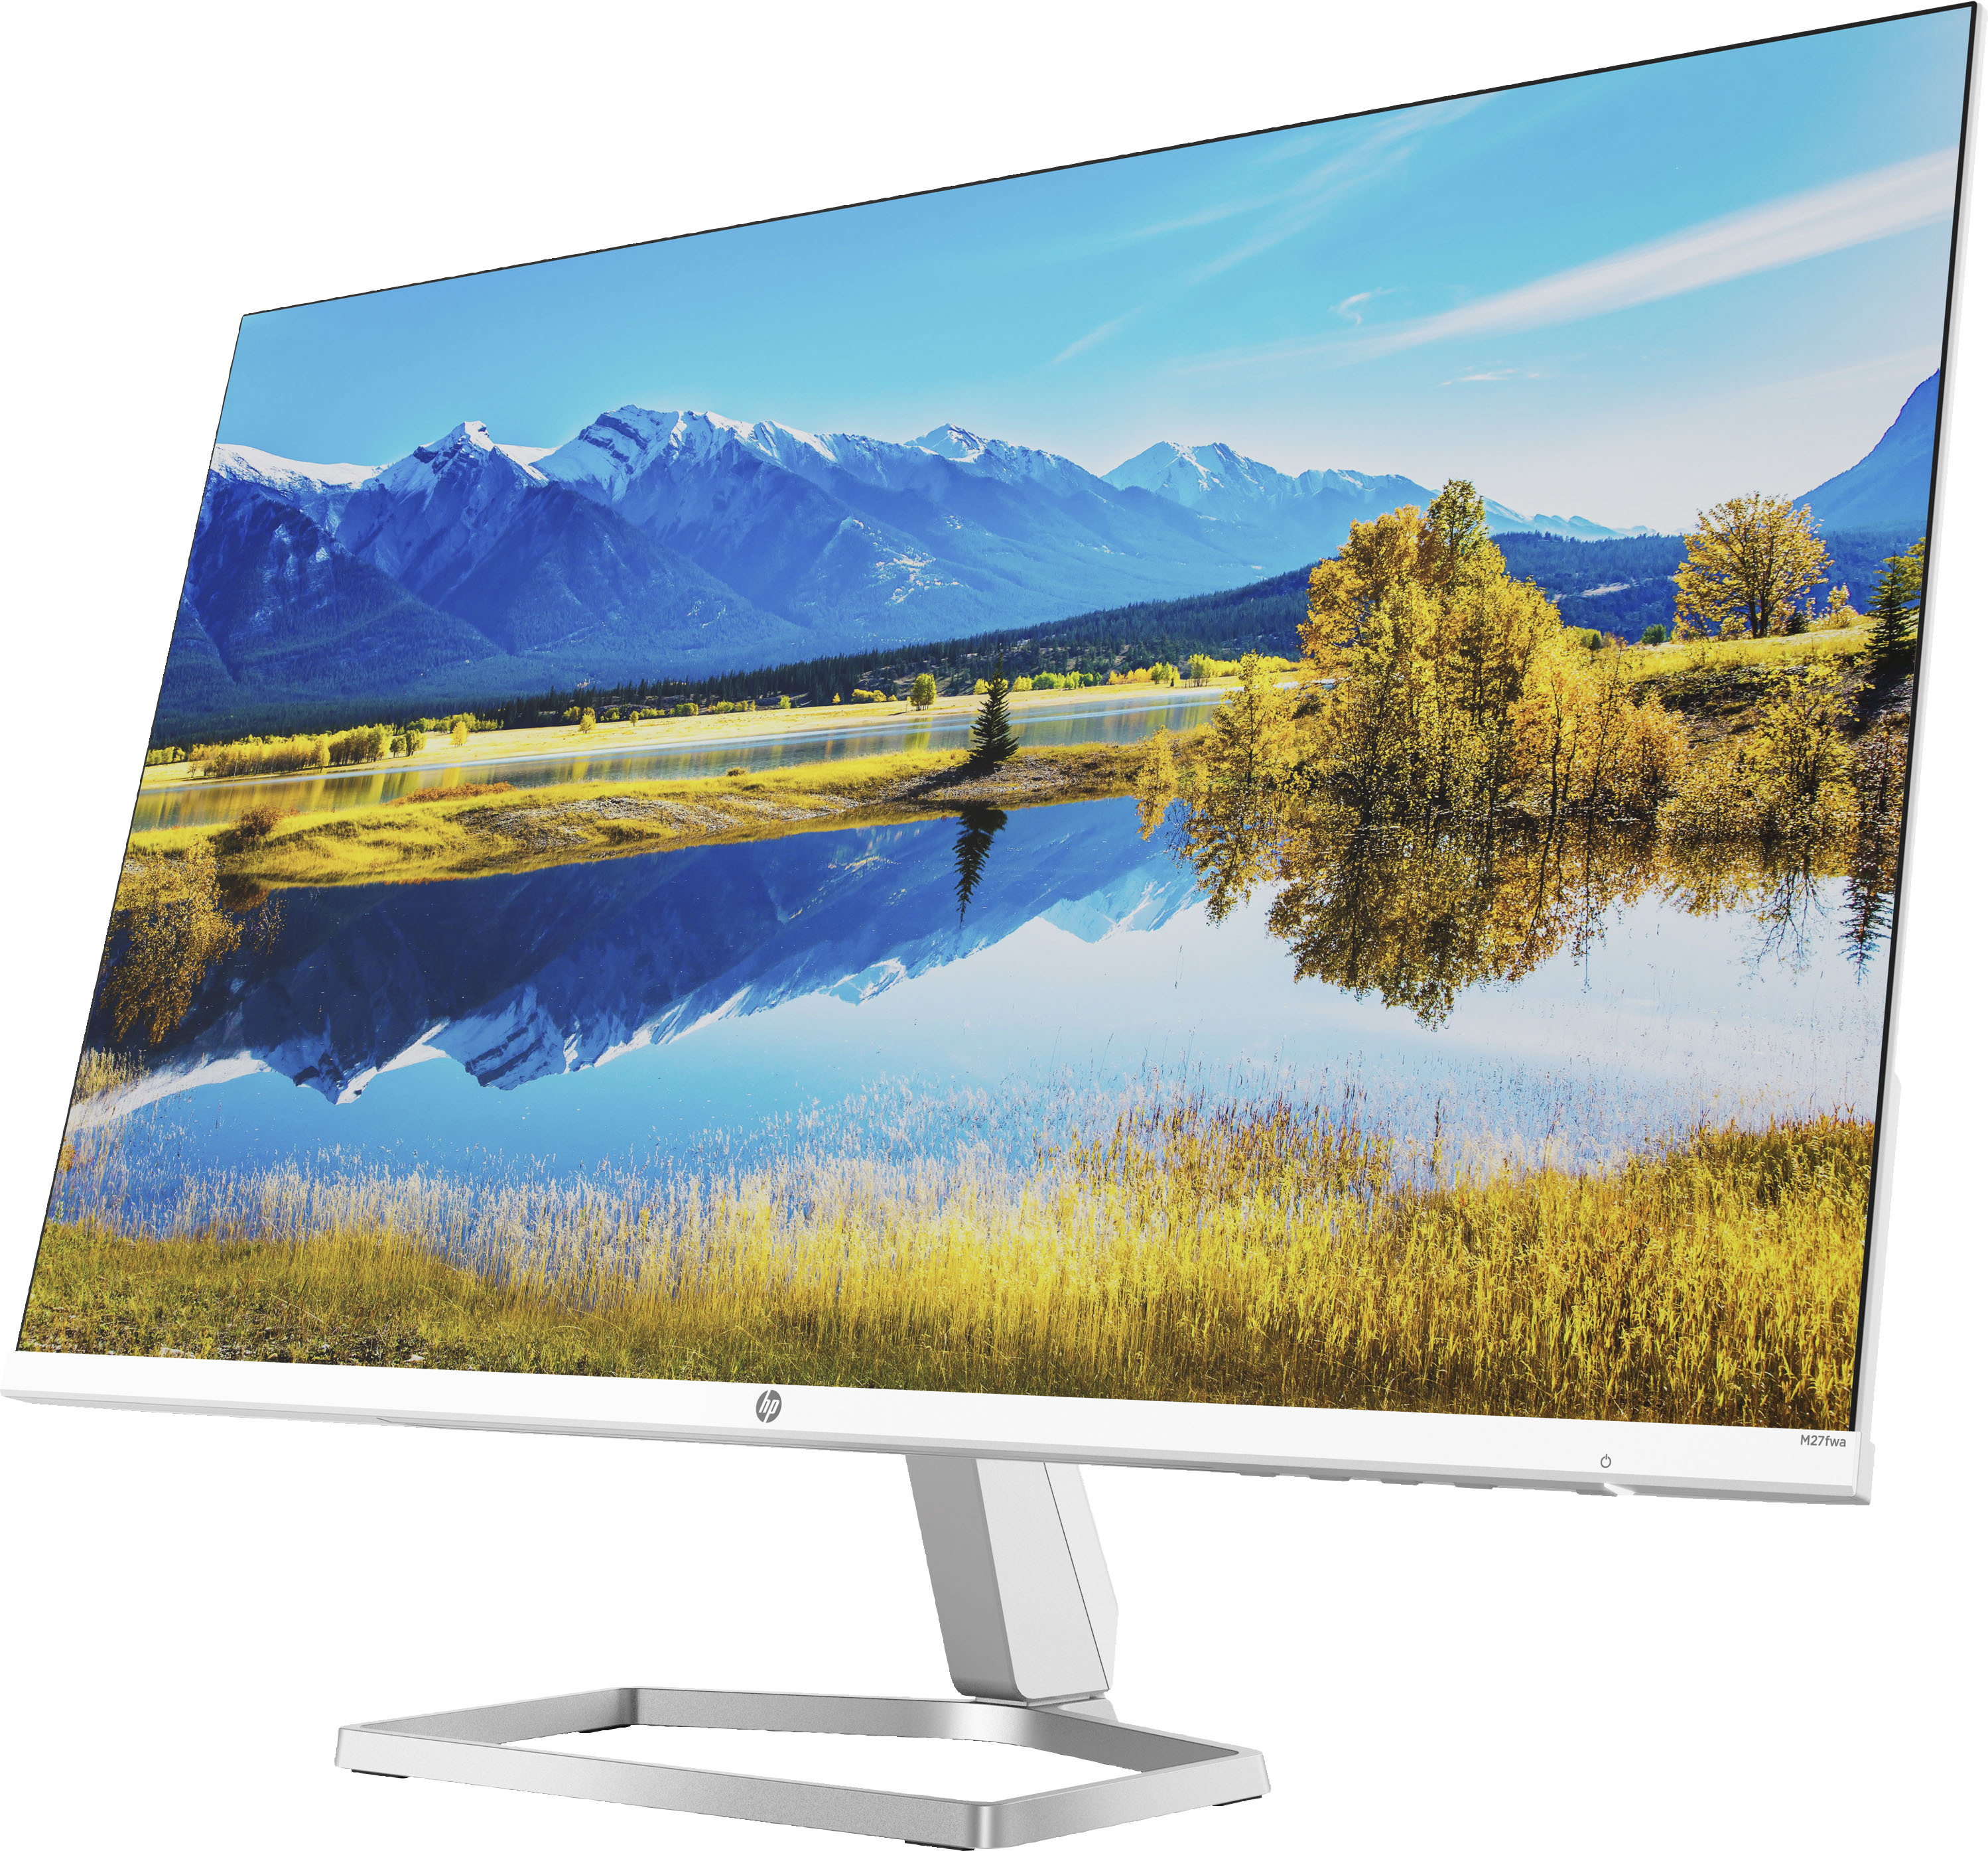 HP 27 IPS LED FHD FreeSync Monitor (HDMI x2, VGA) with Integrated